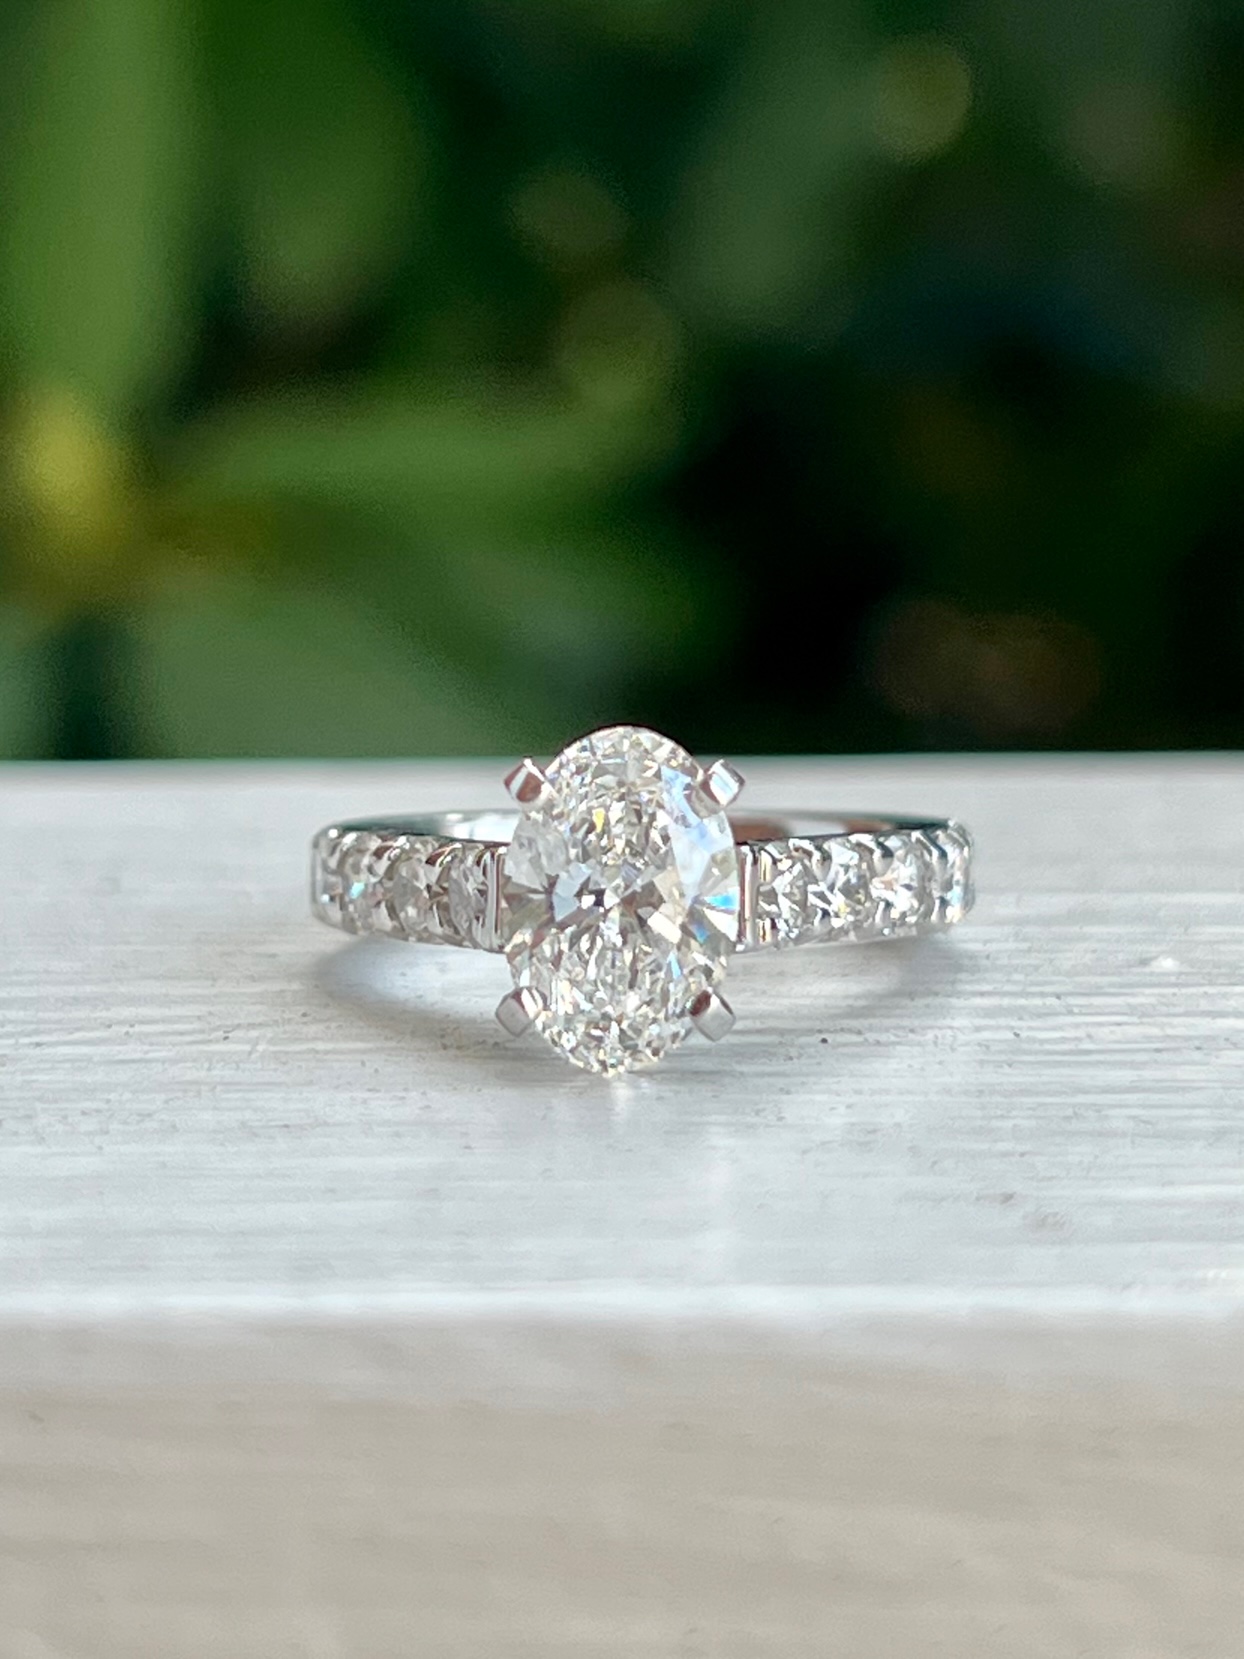 Custom Designed Engagement Ring with Oval Prong Set Center and Round Diamonds in Shared Prong Shank